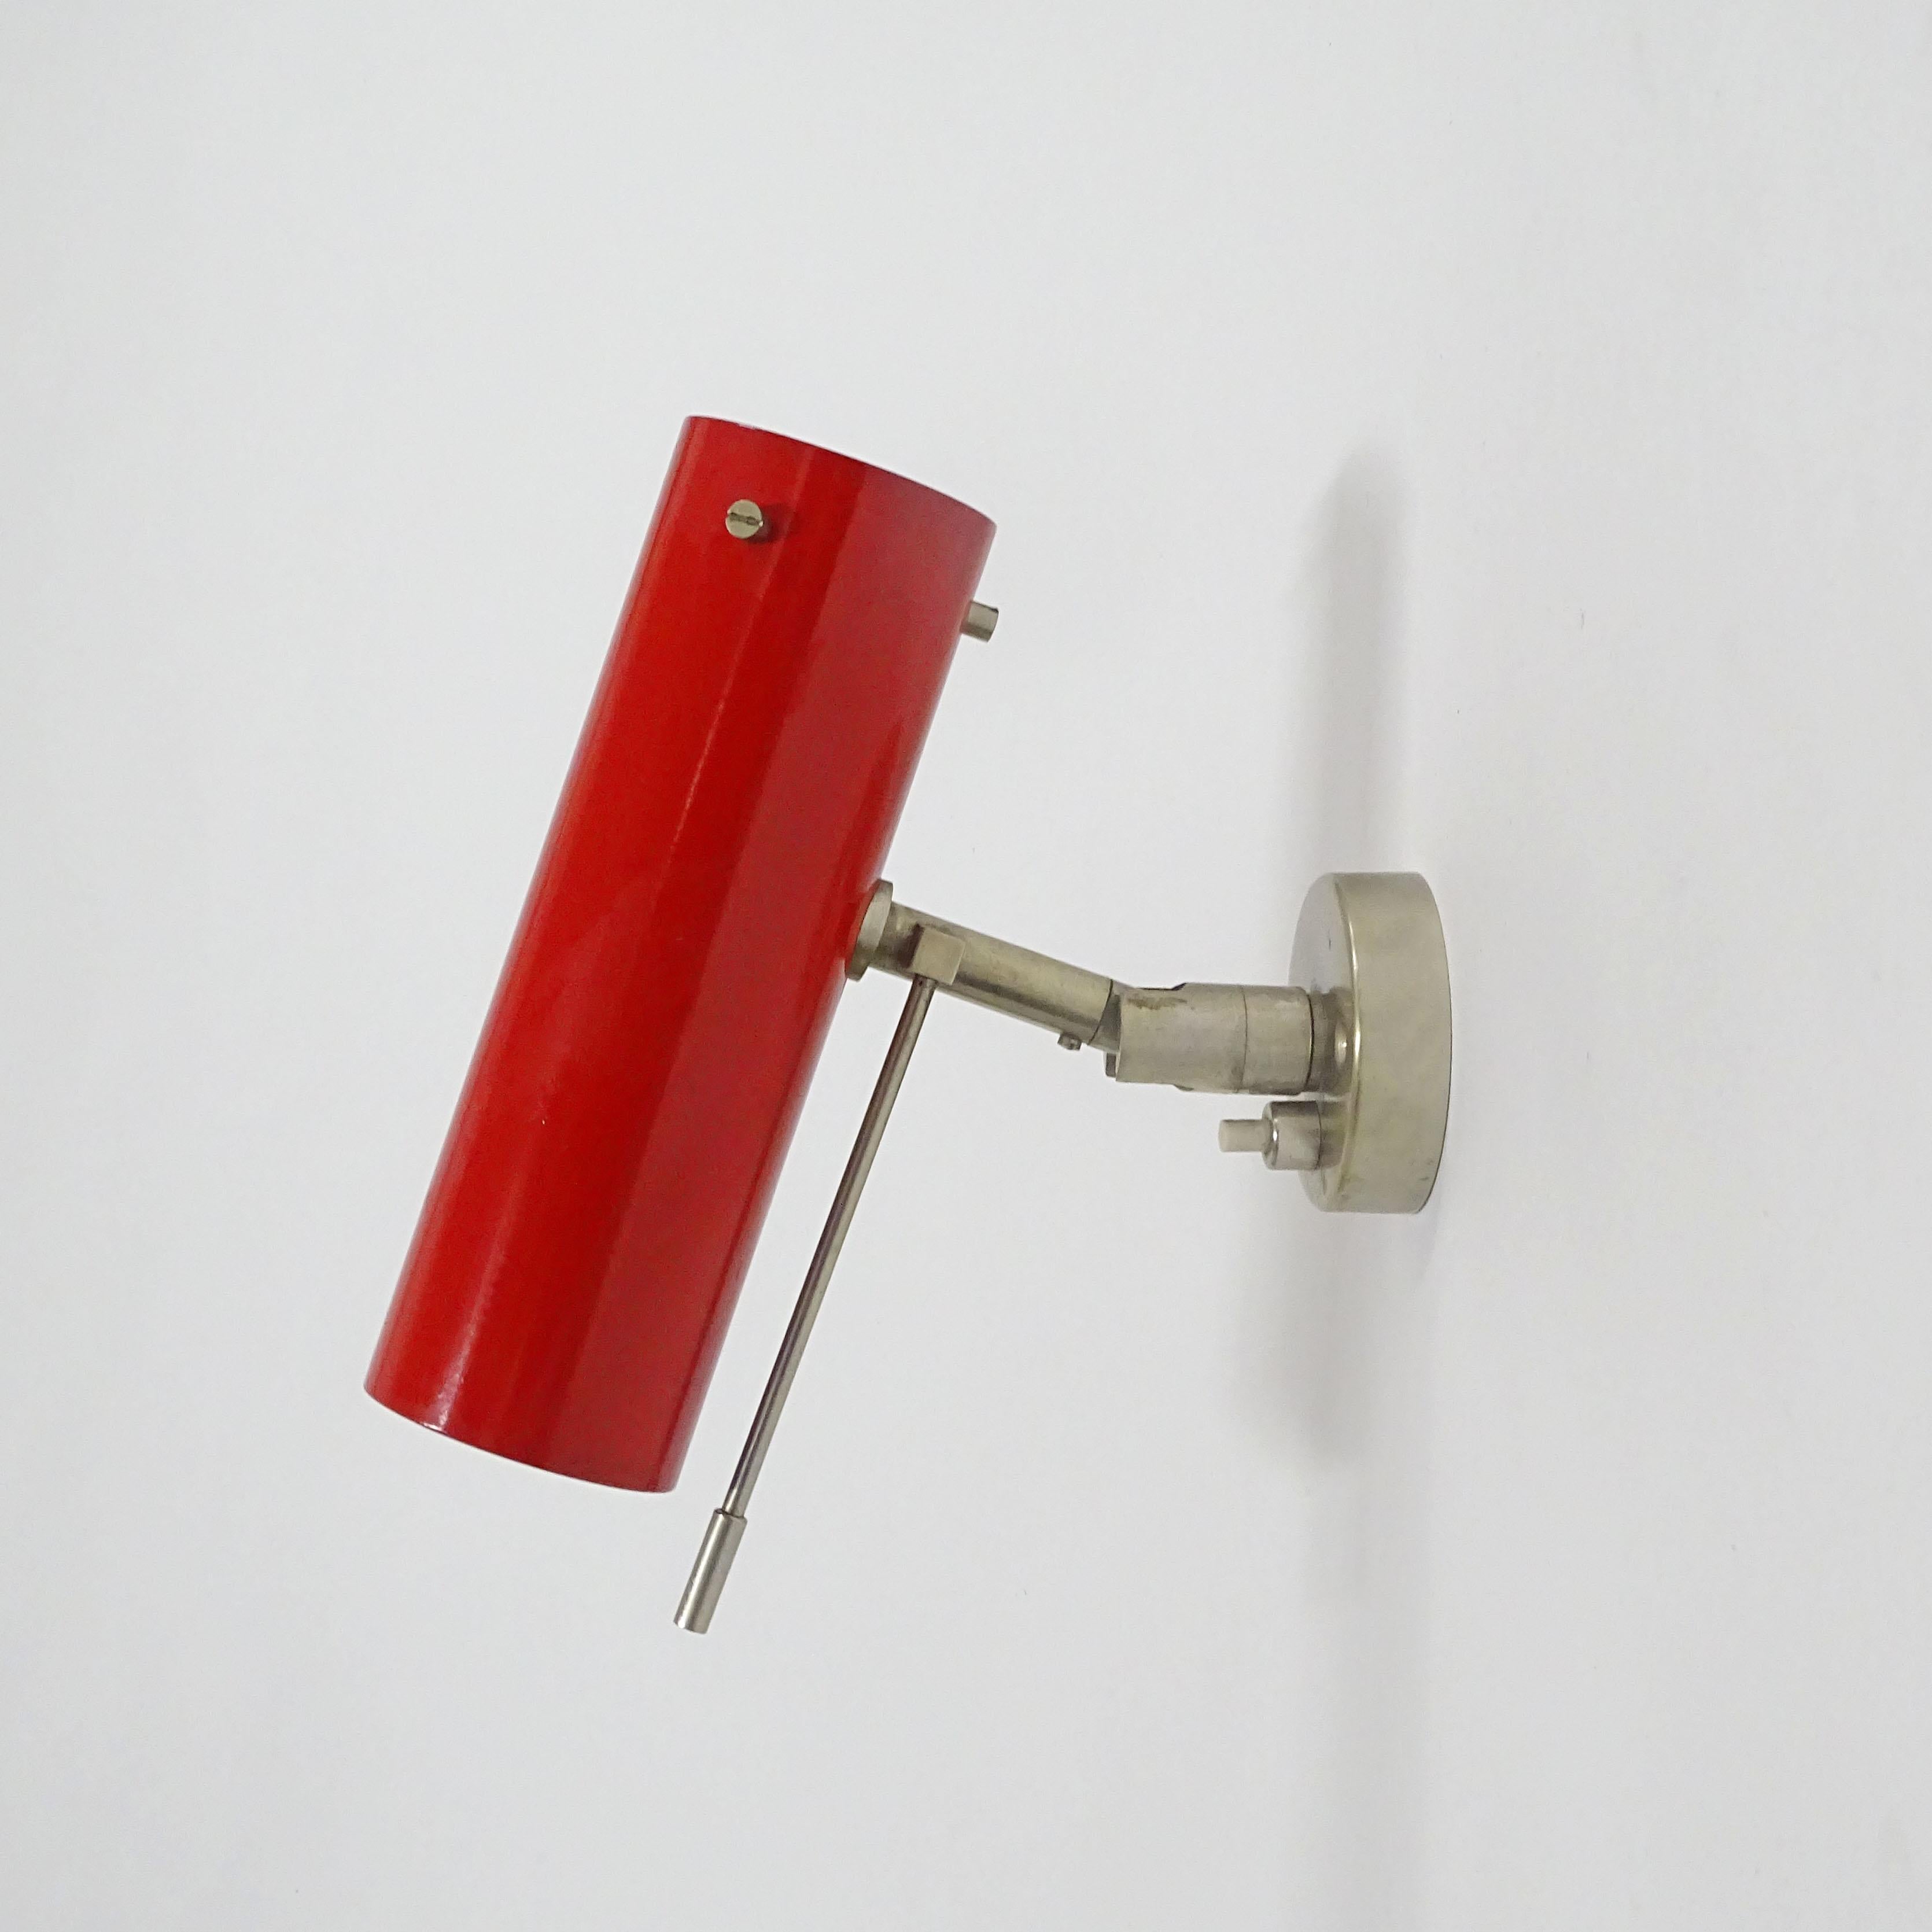 Splendid single red and nickel wall light by Tito Agnoli for Oluce, Italy 1950s